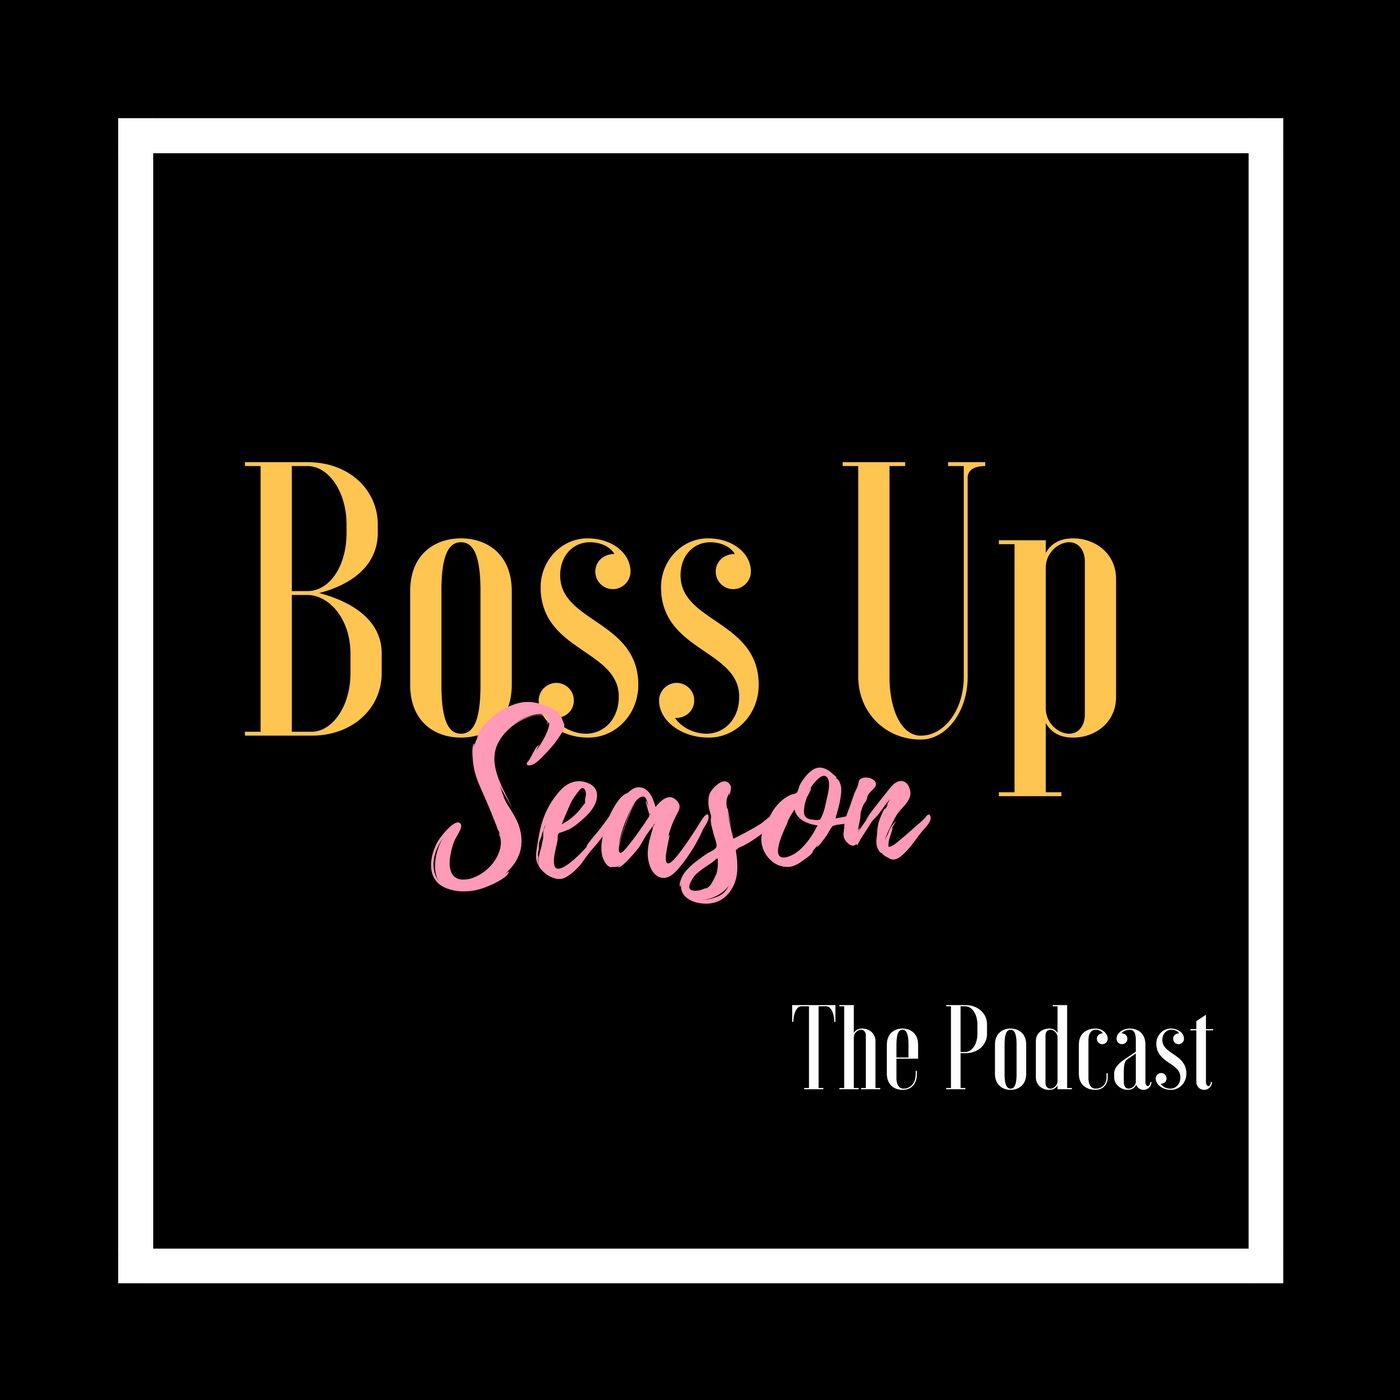 Stream Boss Up Season The Podcast | Listen to podcast episodes online for  free on SoundCloud